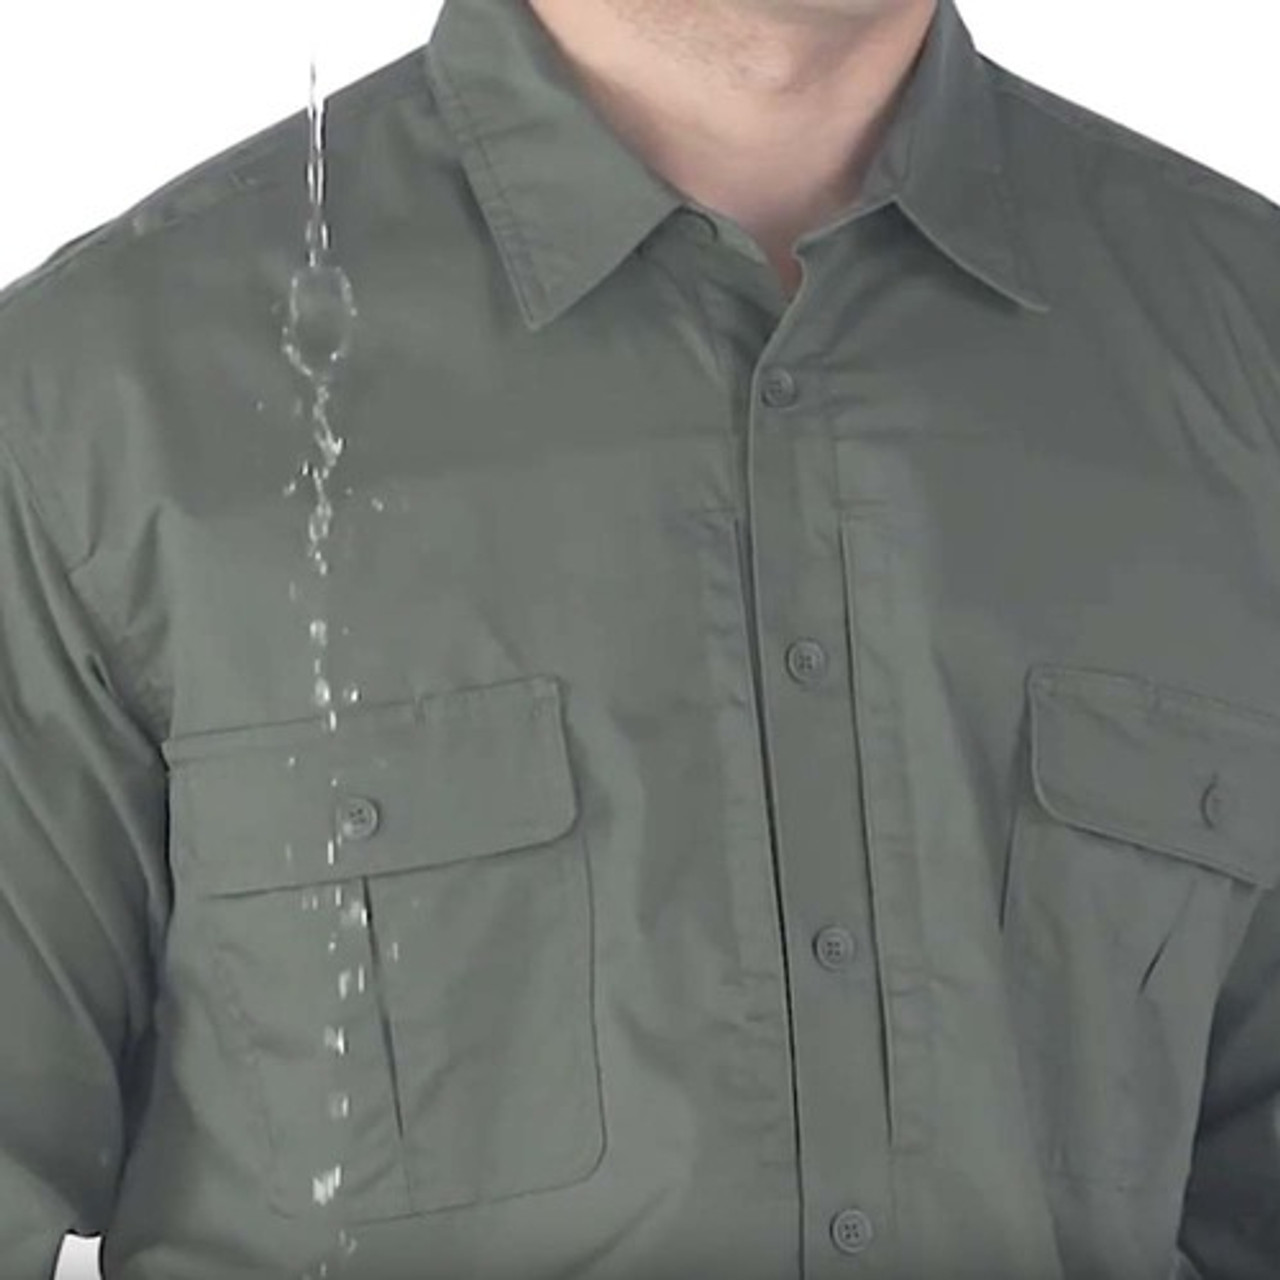 Propper F5350 Men's Kinetic Tactical Button-Down Uniform Shirt, Short Sleeve, Polyester/Cotton Ripstop NEXStretch Fabric w/DWR, available in black, khaki, olive and LAPD Navy